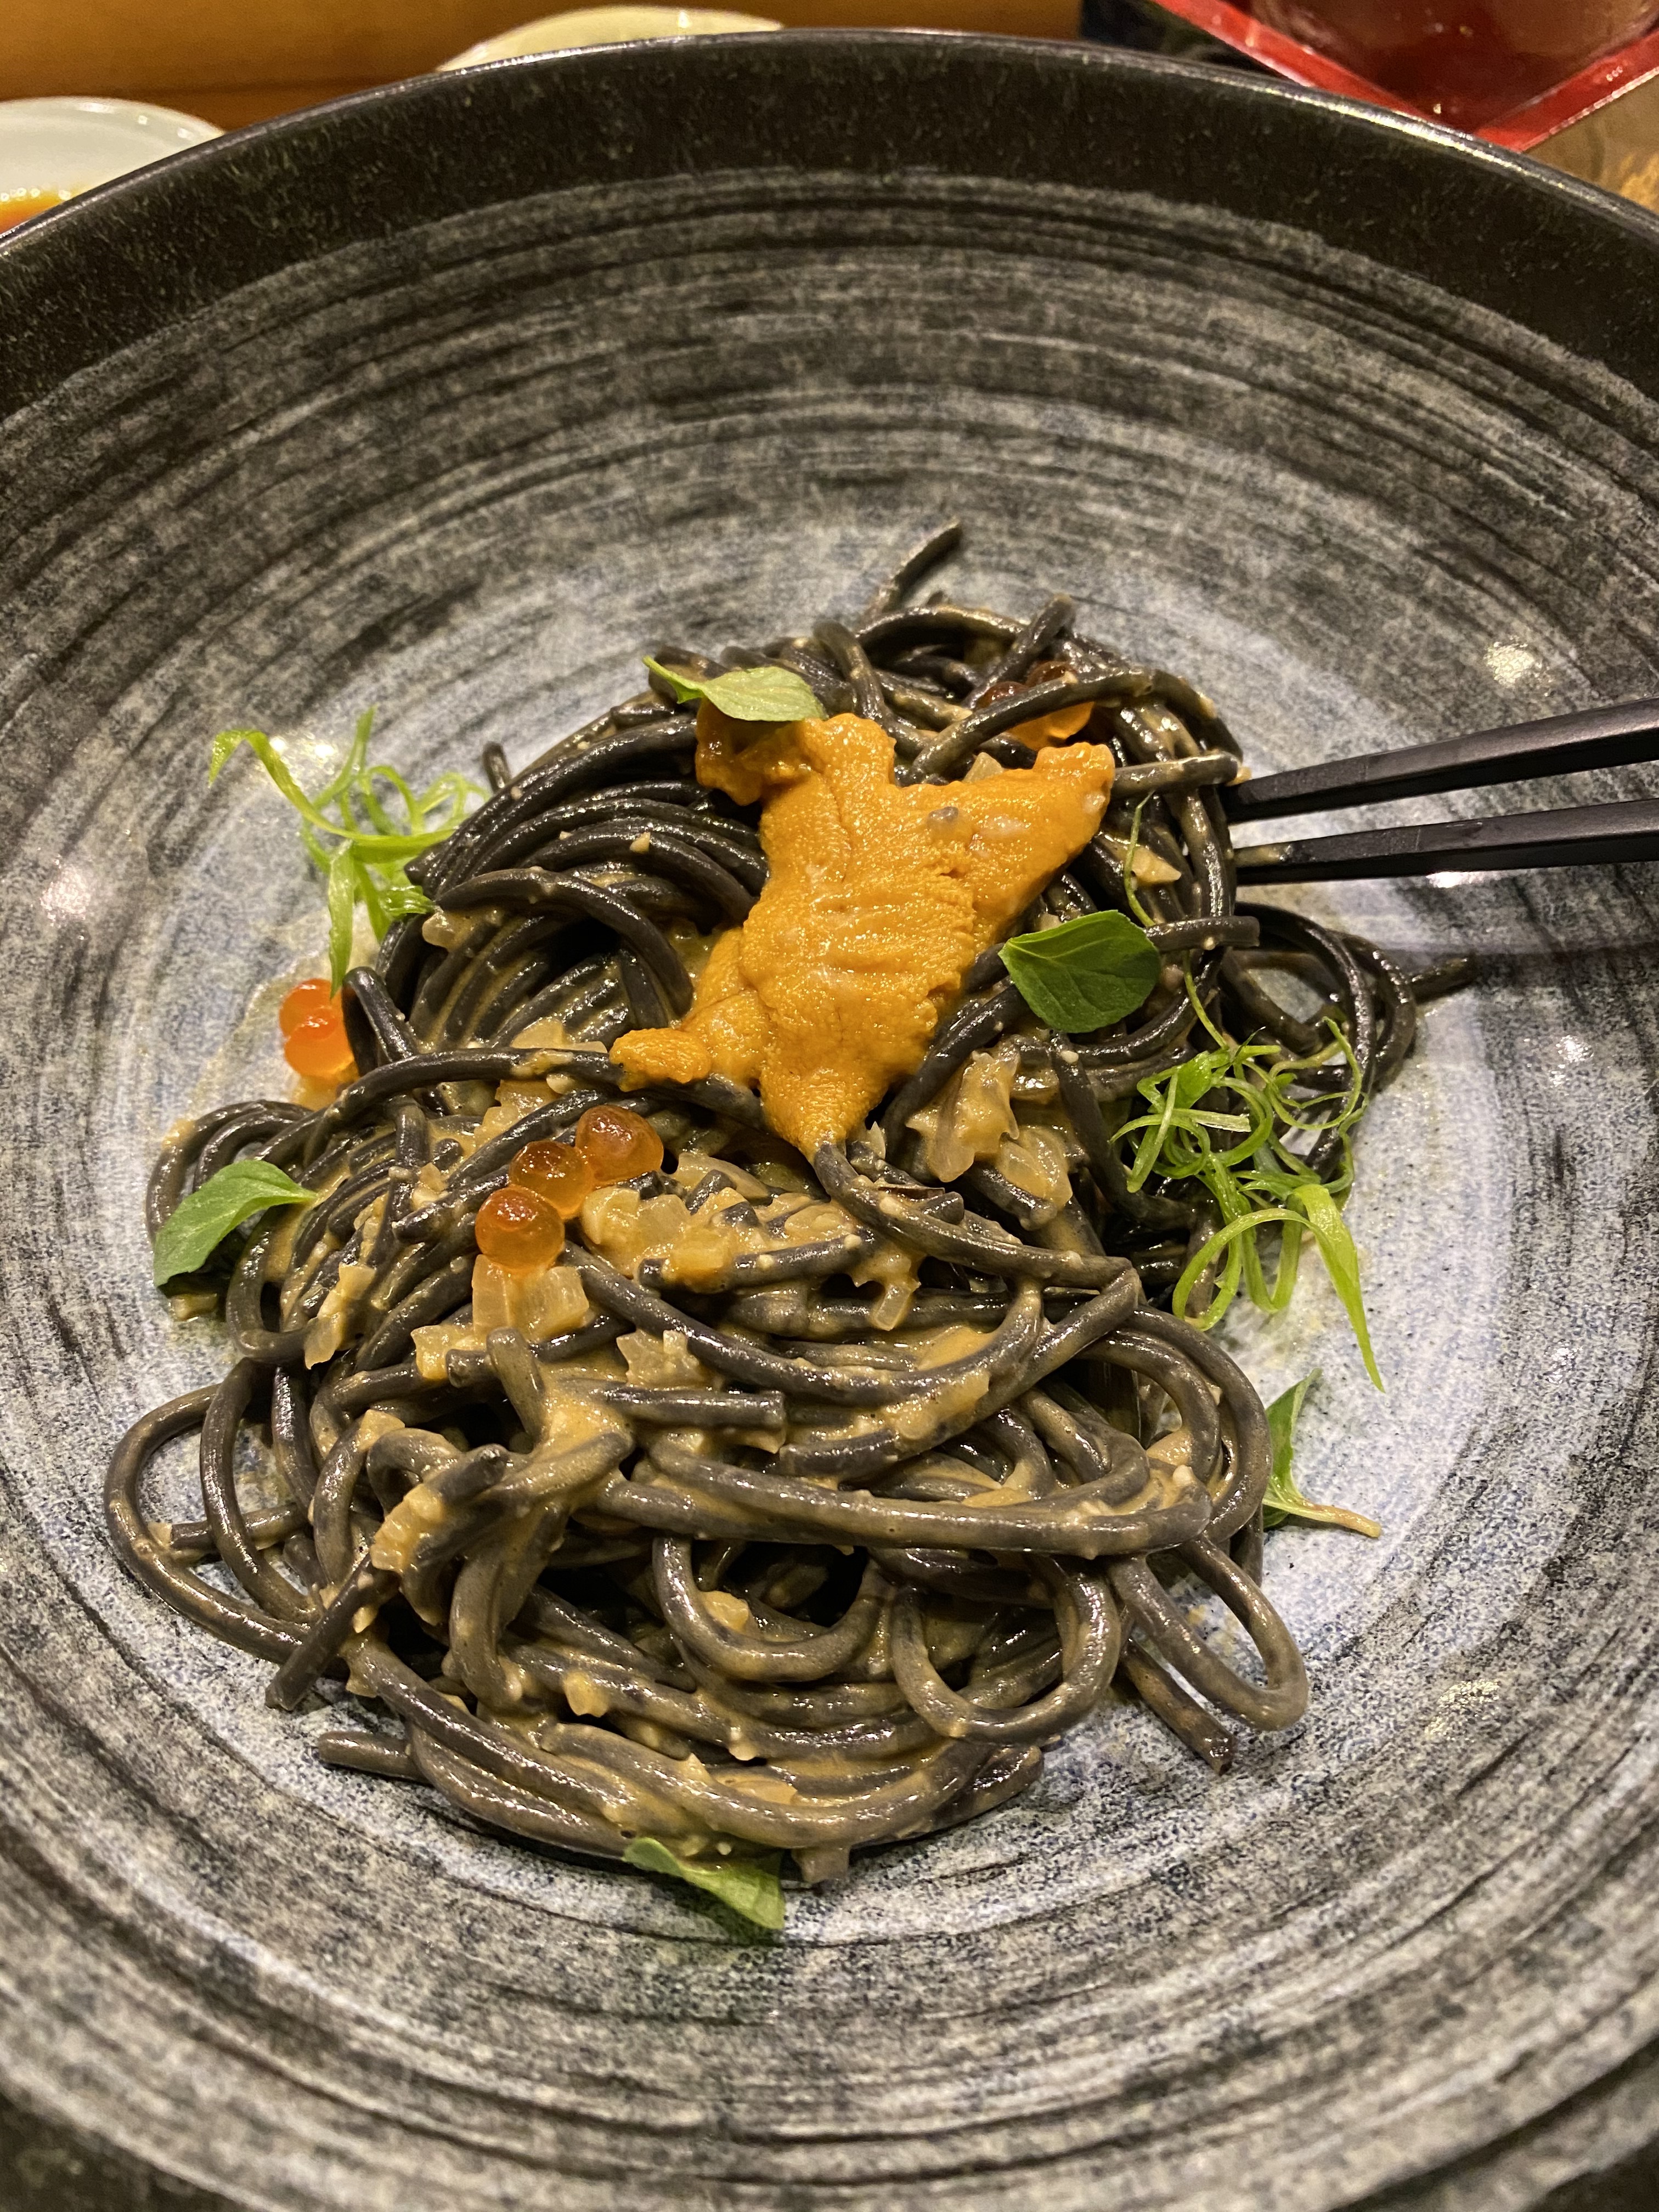 Squid ink pasta comes with a bright-orange uni butter with dots of salmon roe